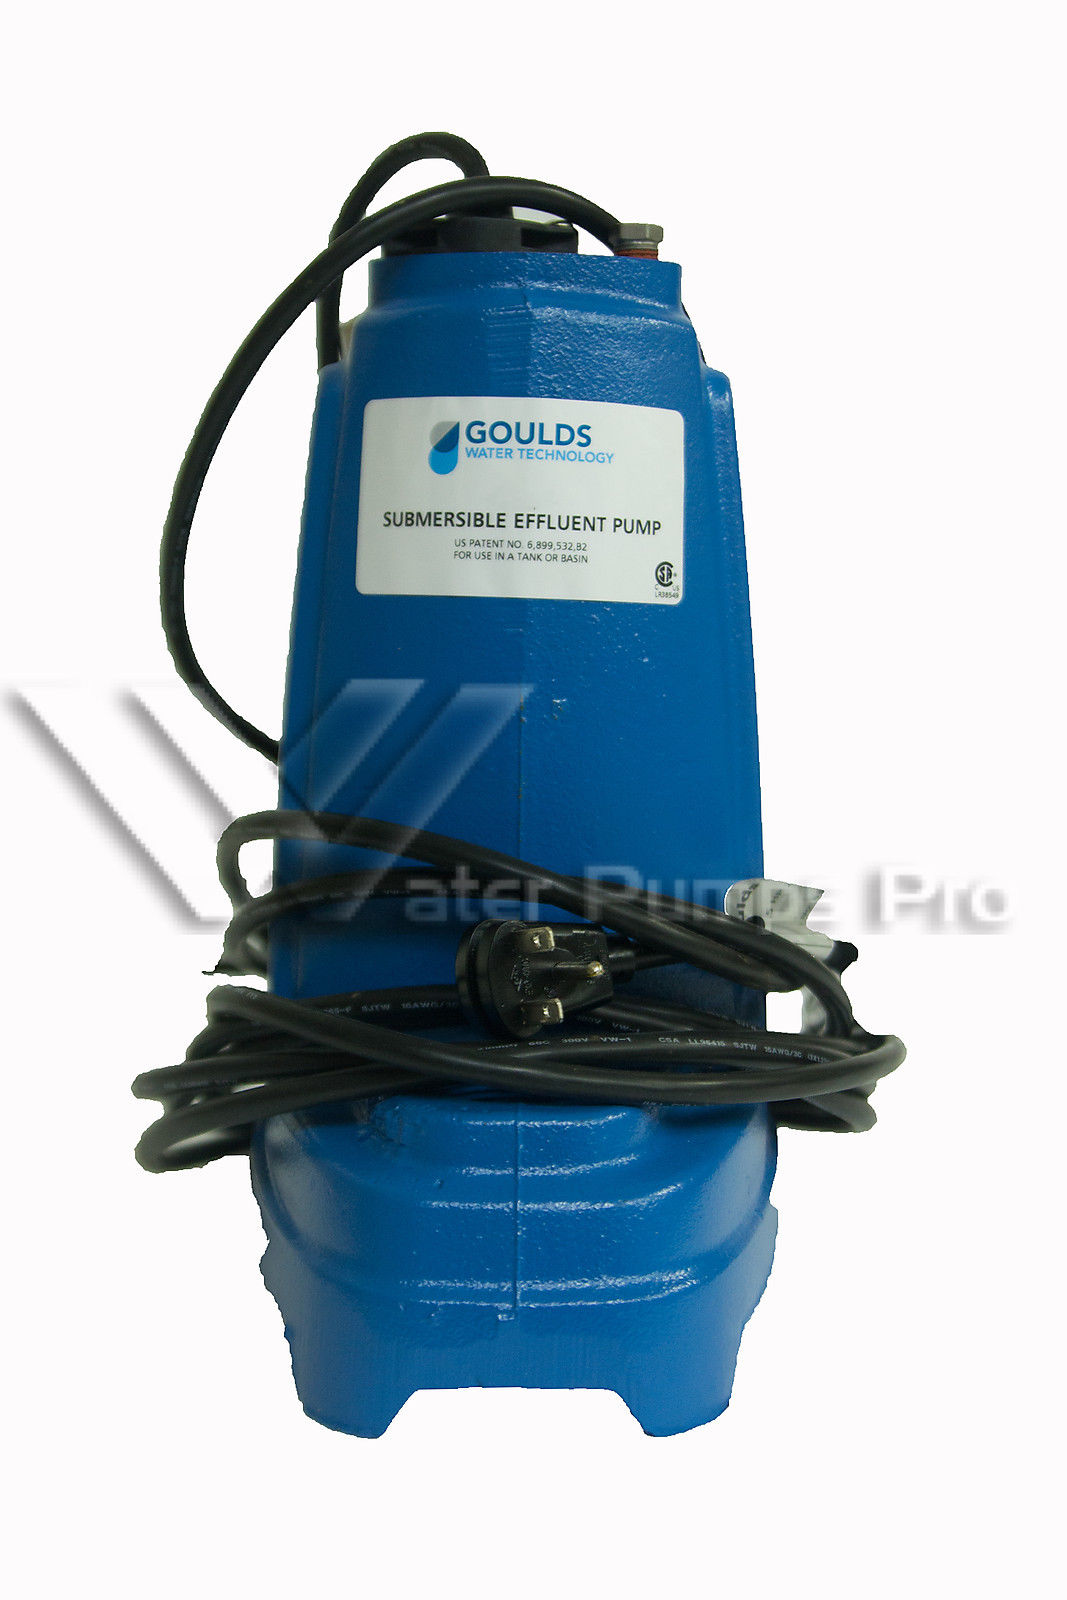 Goulds PE41M 4/10 HP, 115V Submersible Effluent Pump - Click Image to Close